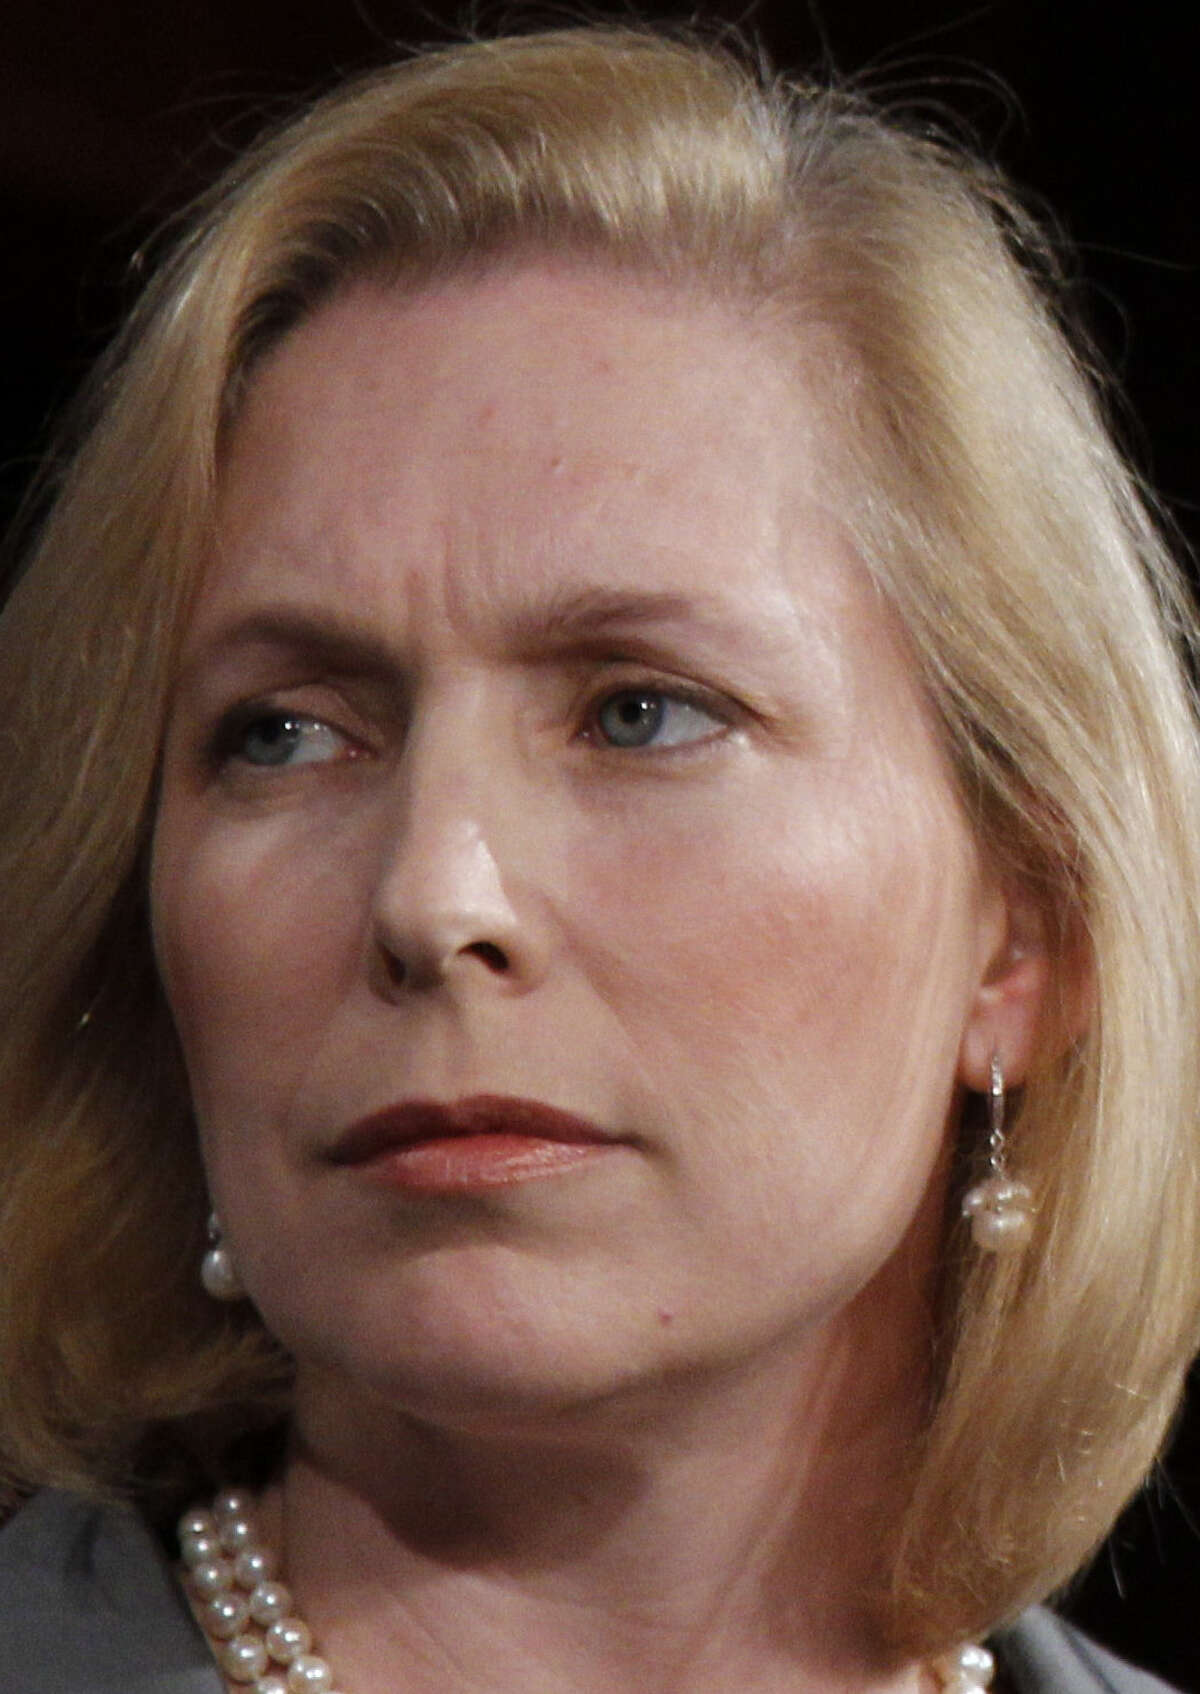 Sen. Kirsten Gillibrand has requested data on sex-assault cases at each service's largest installation.